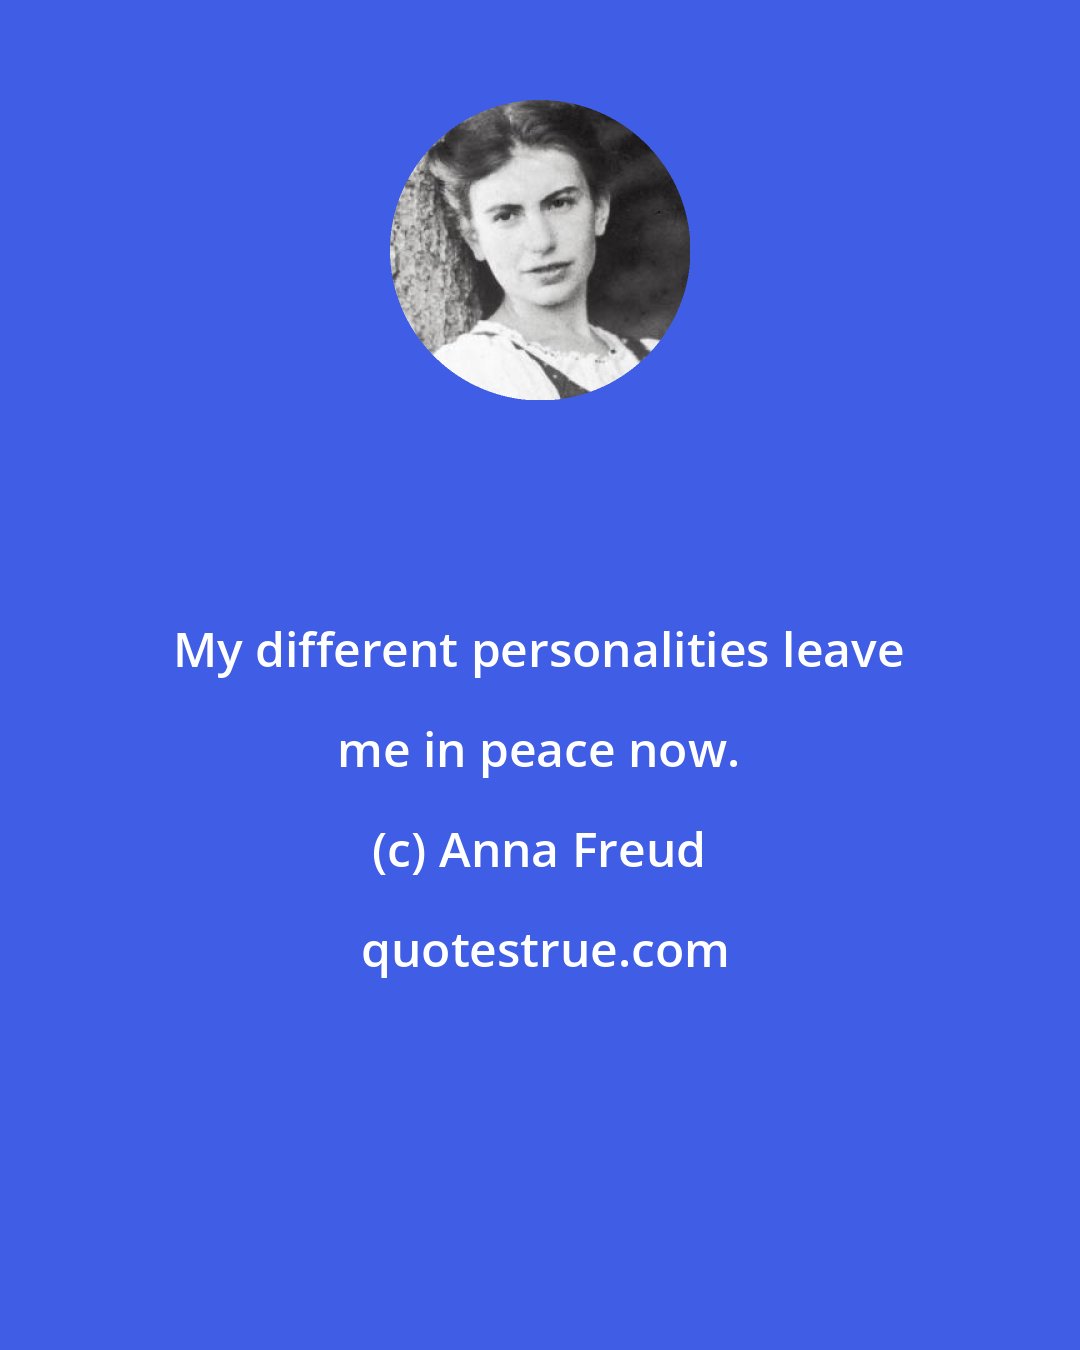 Anna Freud: My different personalities leave me in peace now.